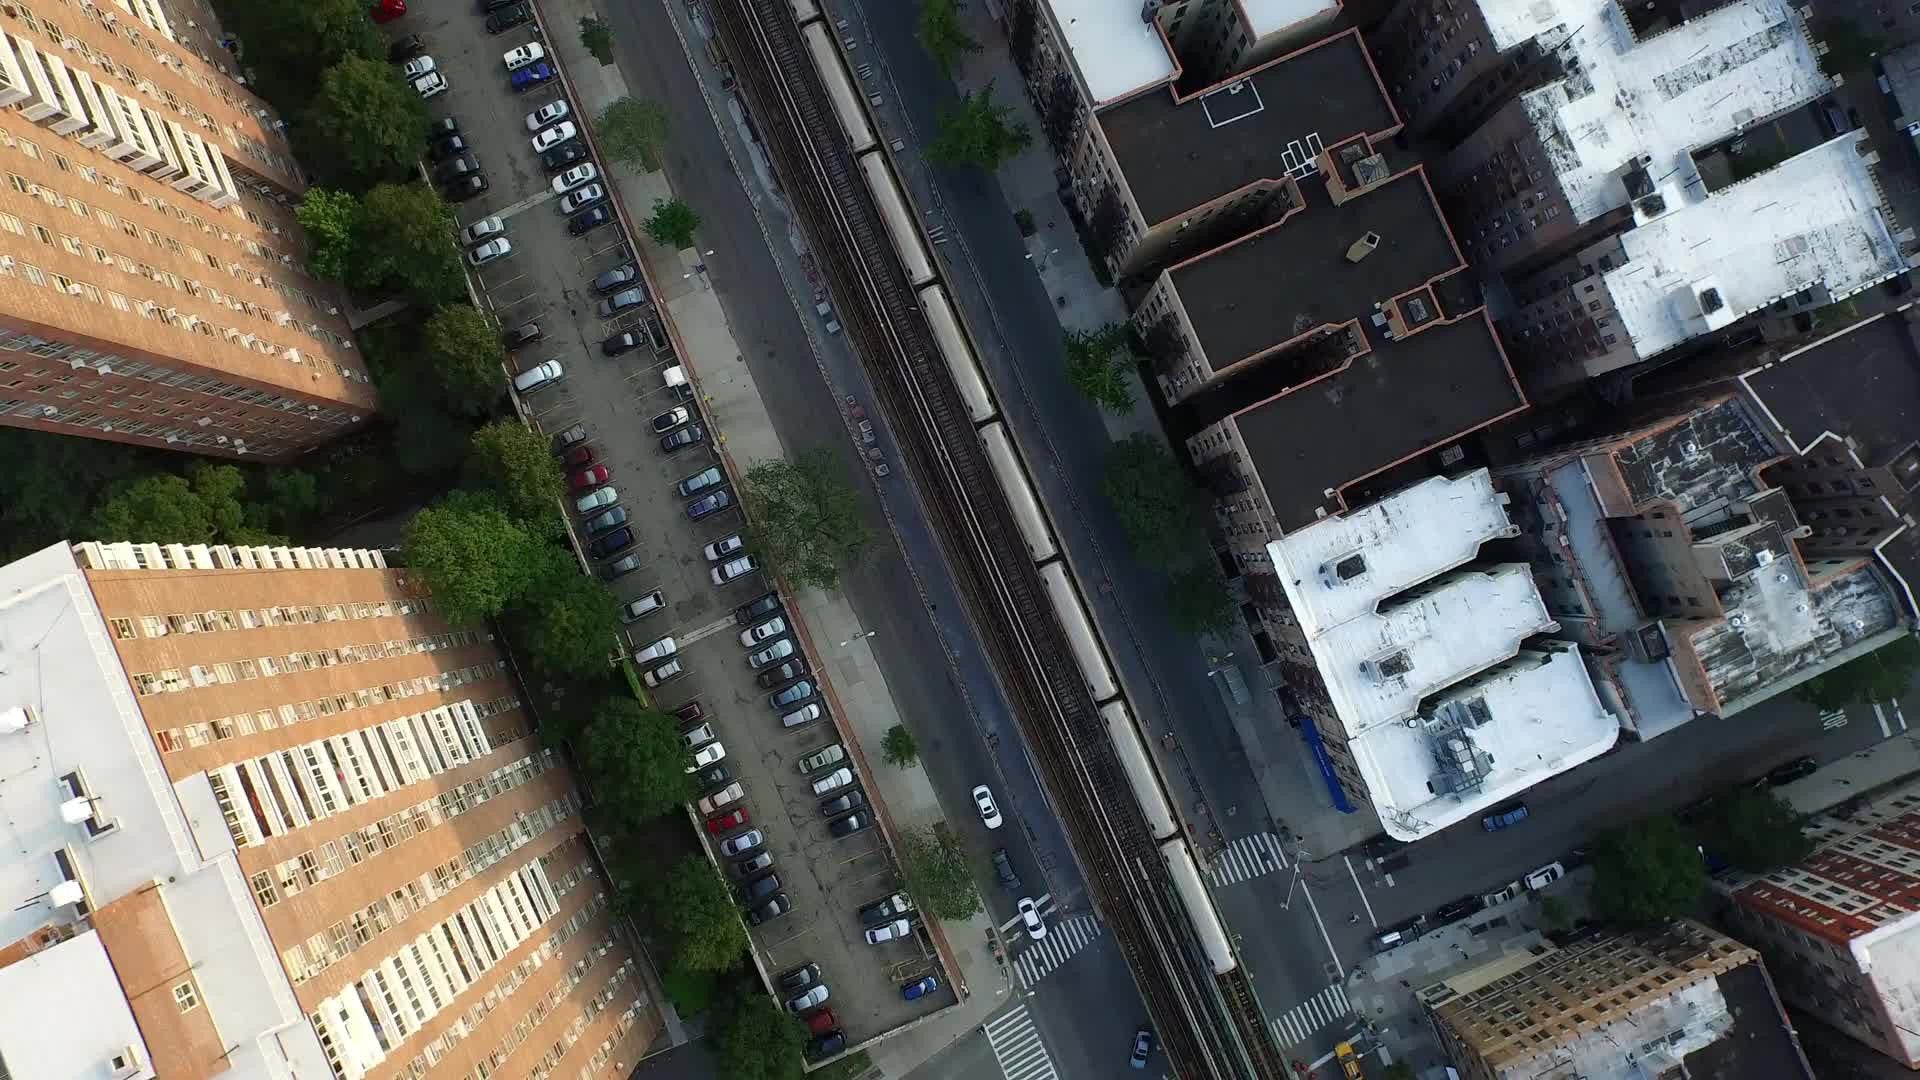 aerial over 1 train elevated track and red brick housing projects in Harlem NYC